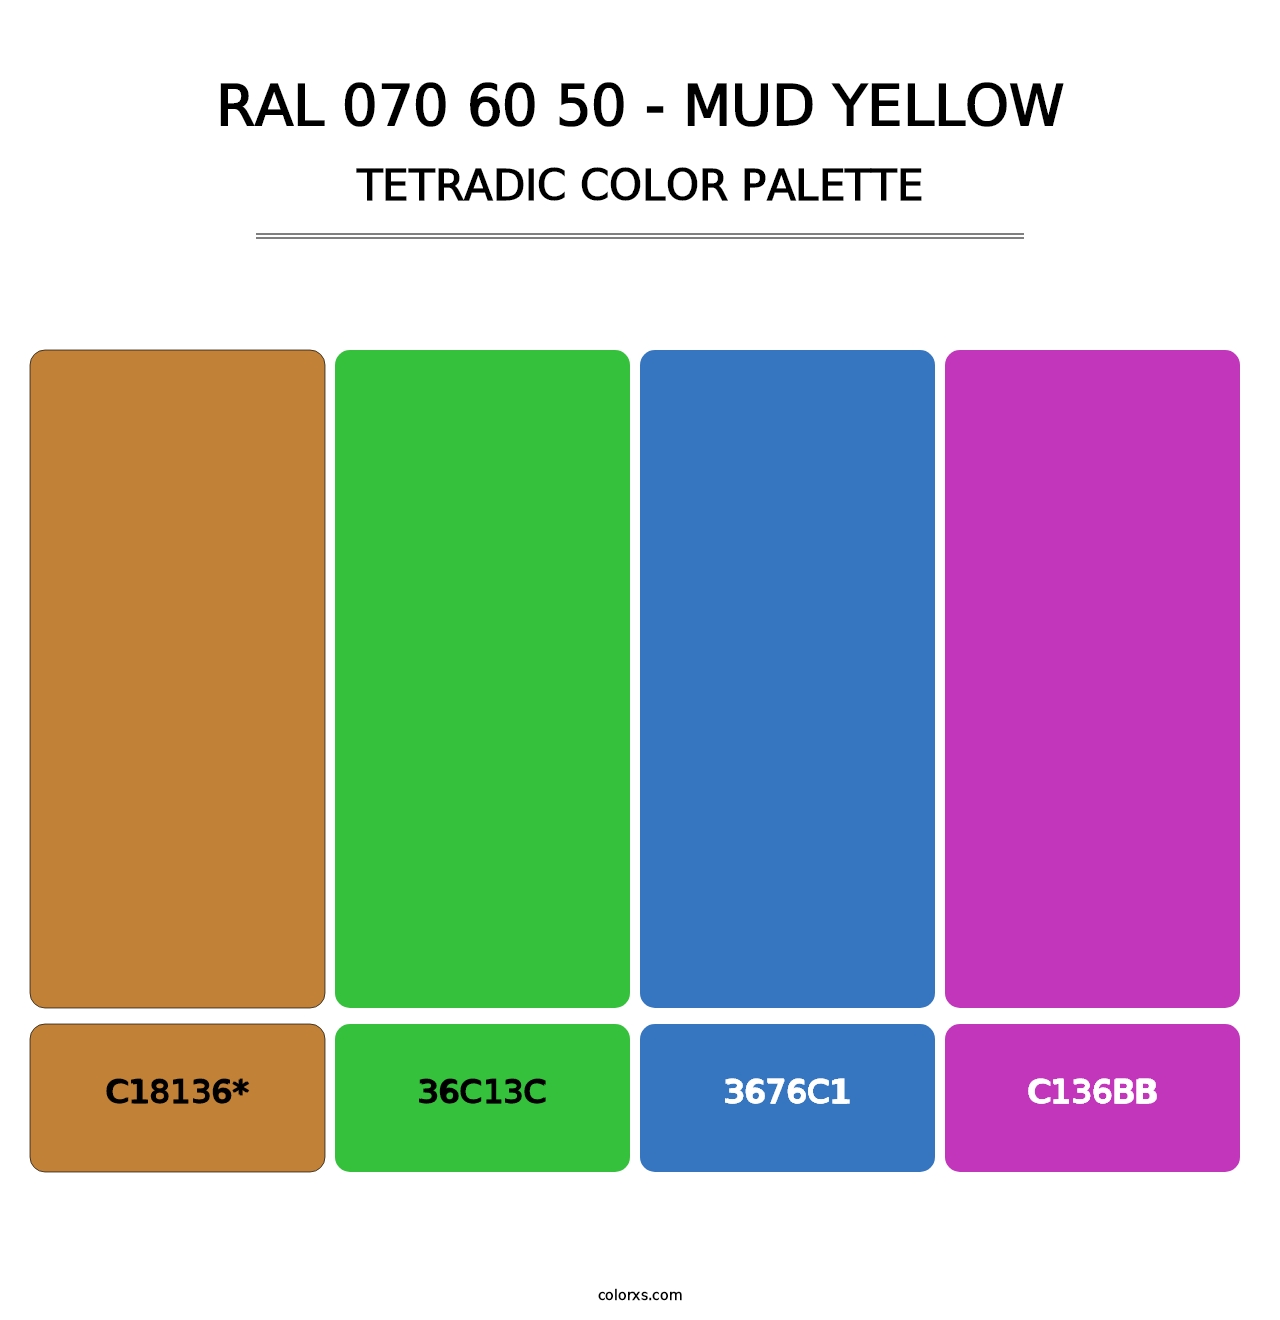 RAL 070 60 50 - Mud Yellow - Tetradic Color Palette